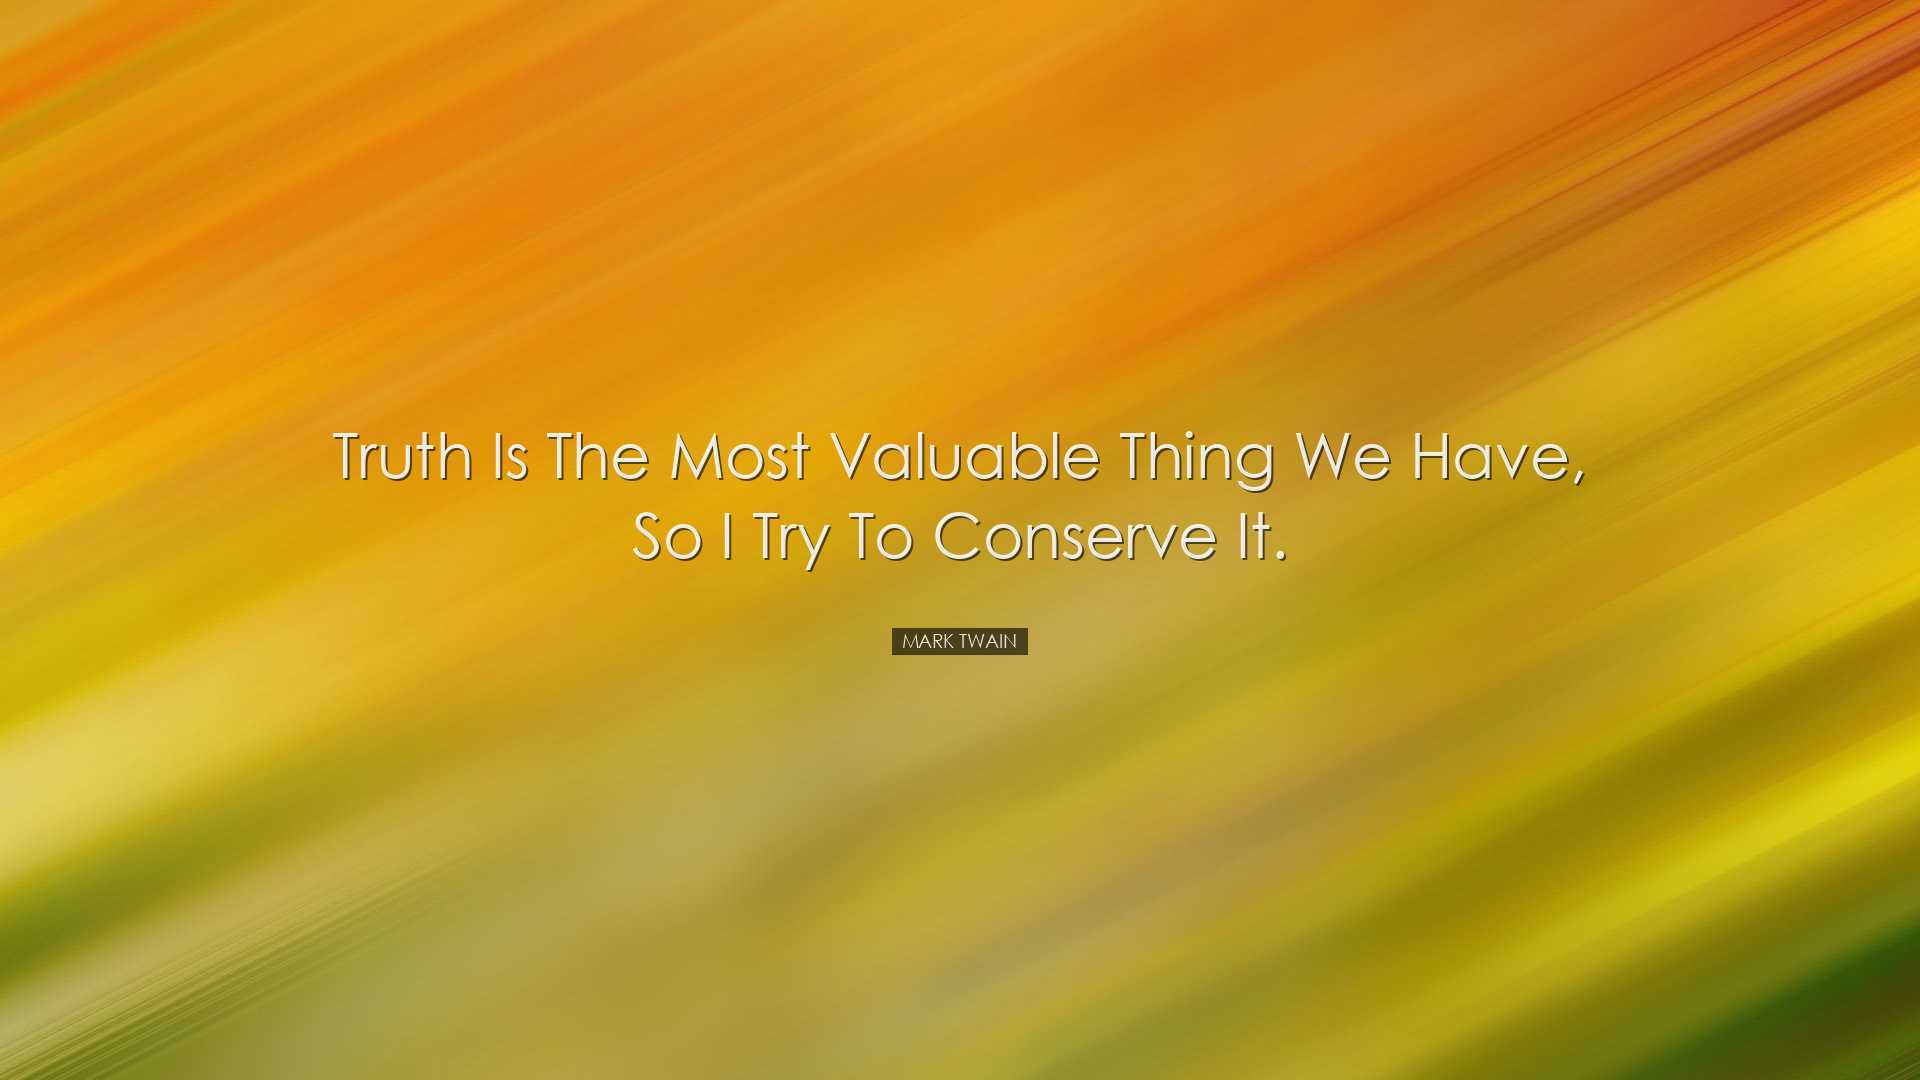 Truth is the most valuable thing we have, so I try to conserve it.